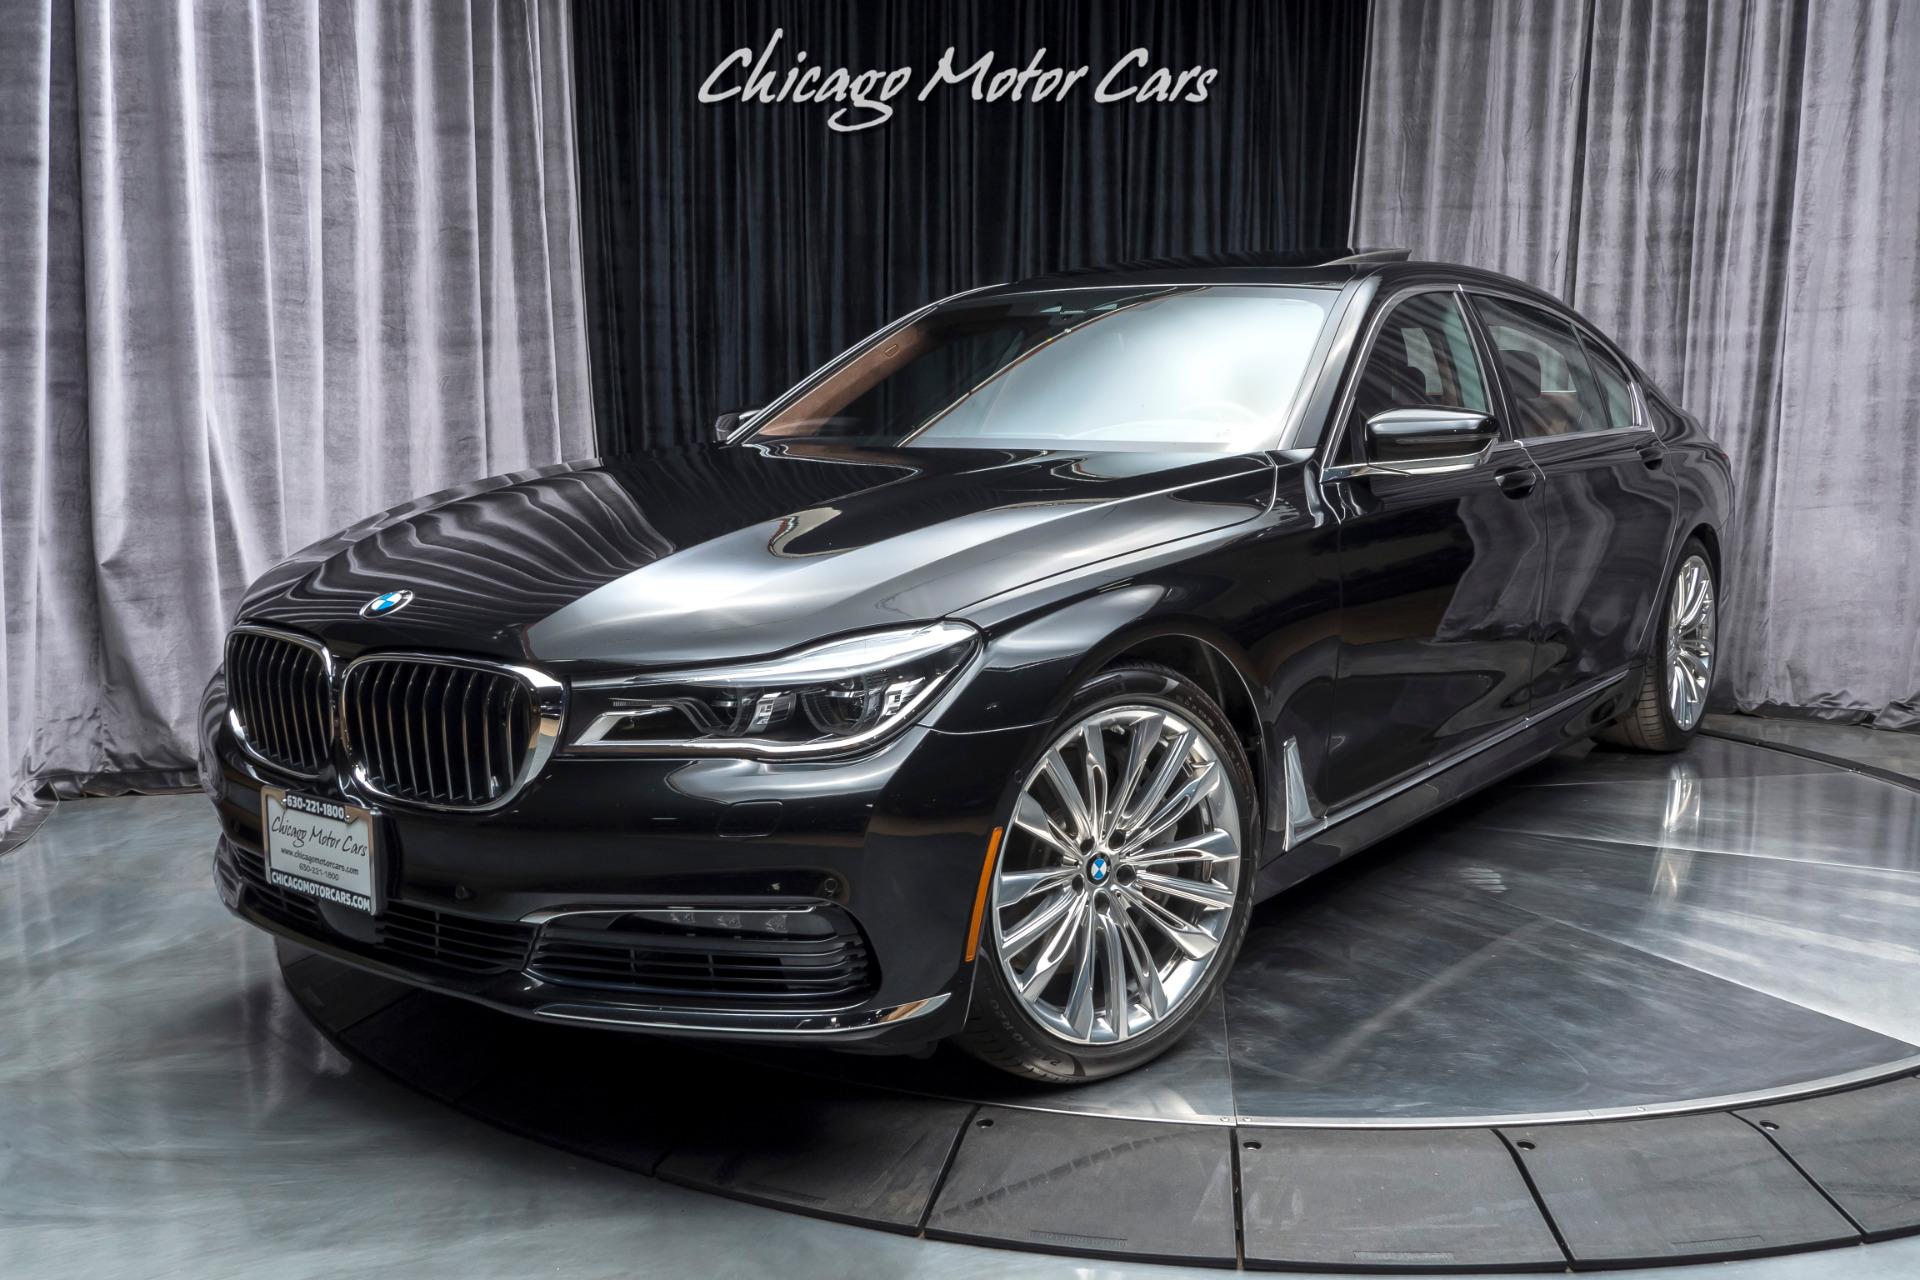 Used 2017 BMW 750i xDrive LWB ORIGINAL MSRP $128K+ LOADED WITH THOUSANDS IN  FACTORY OPTIONS! For Sale (Special Pricing) | Chicago Motor Cars Stock  #16611